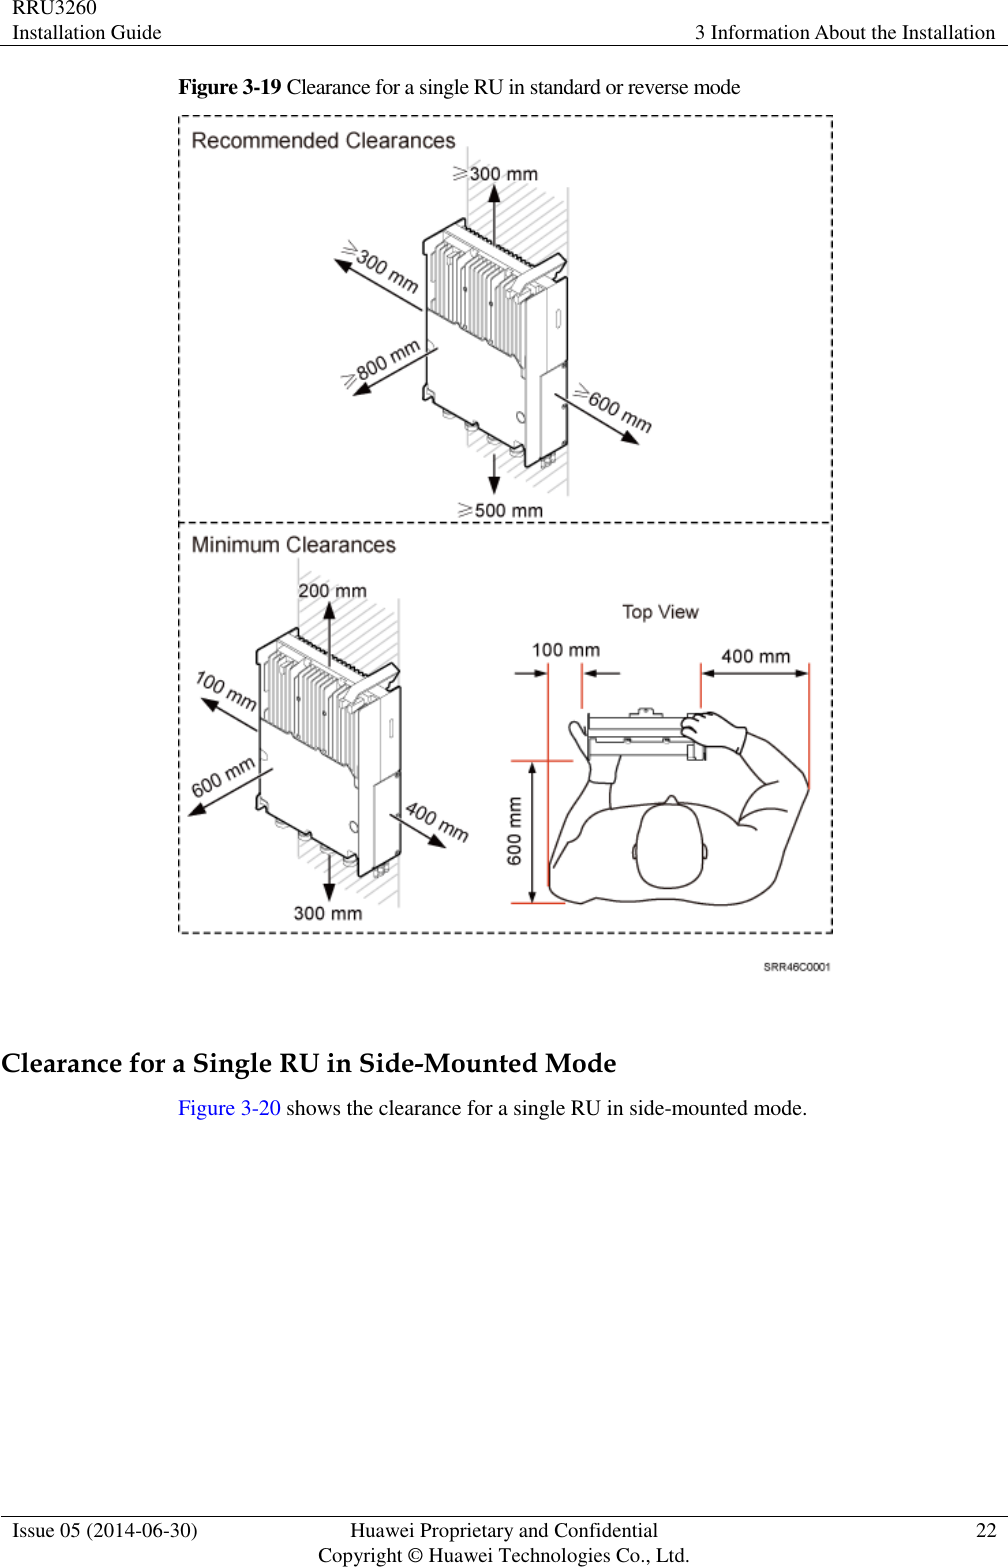 RRU3260 Installation Guide 3 Information About the Installation  Issue 05 (2014-06-30) Huawei Proprietary and Confidential                                     Copyright © Huawei Technologies Co., Ltd. 22  Figure 3-19 Clearance for a single RU in standard or reverse mode   Clearance for a Single RU in Side-Mounted Mode Figure 3-20 shows the clearance for a single RU in side-mounted mode. 